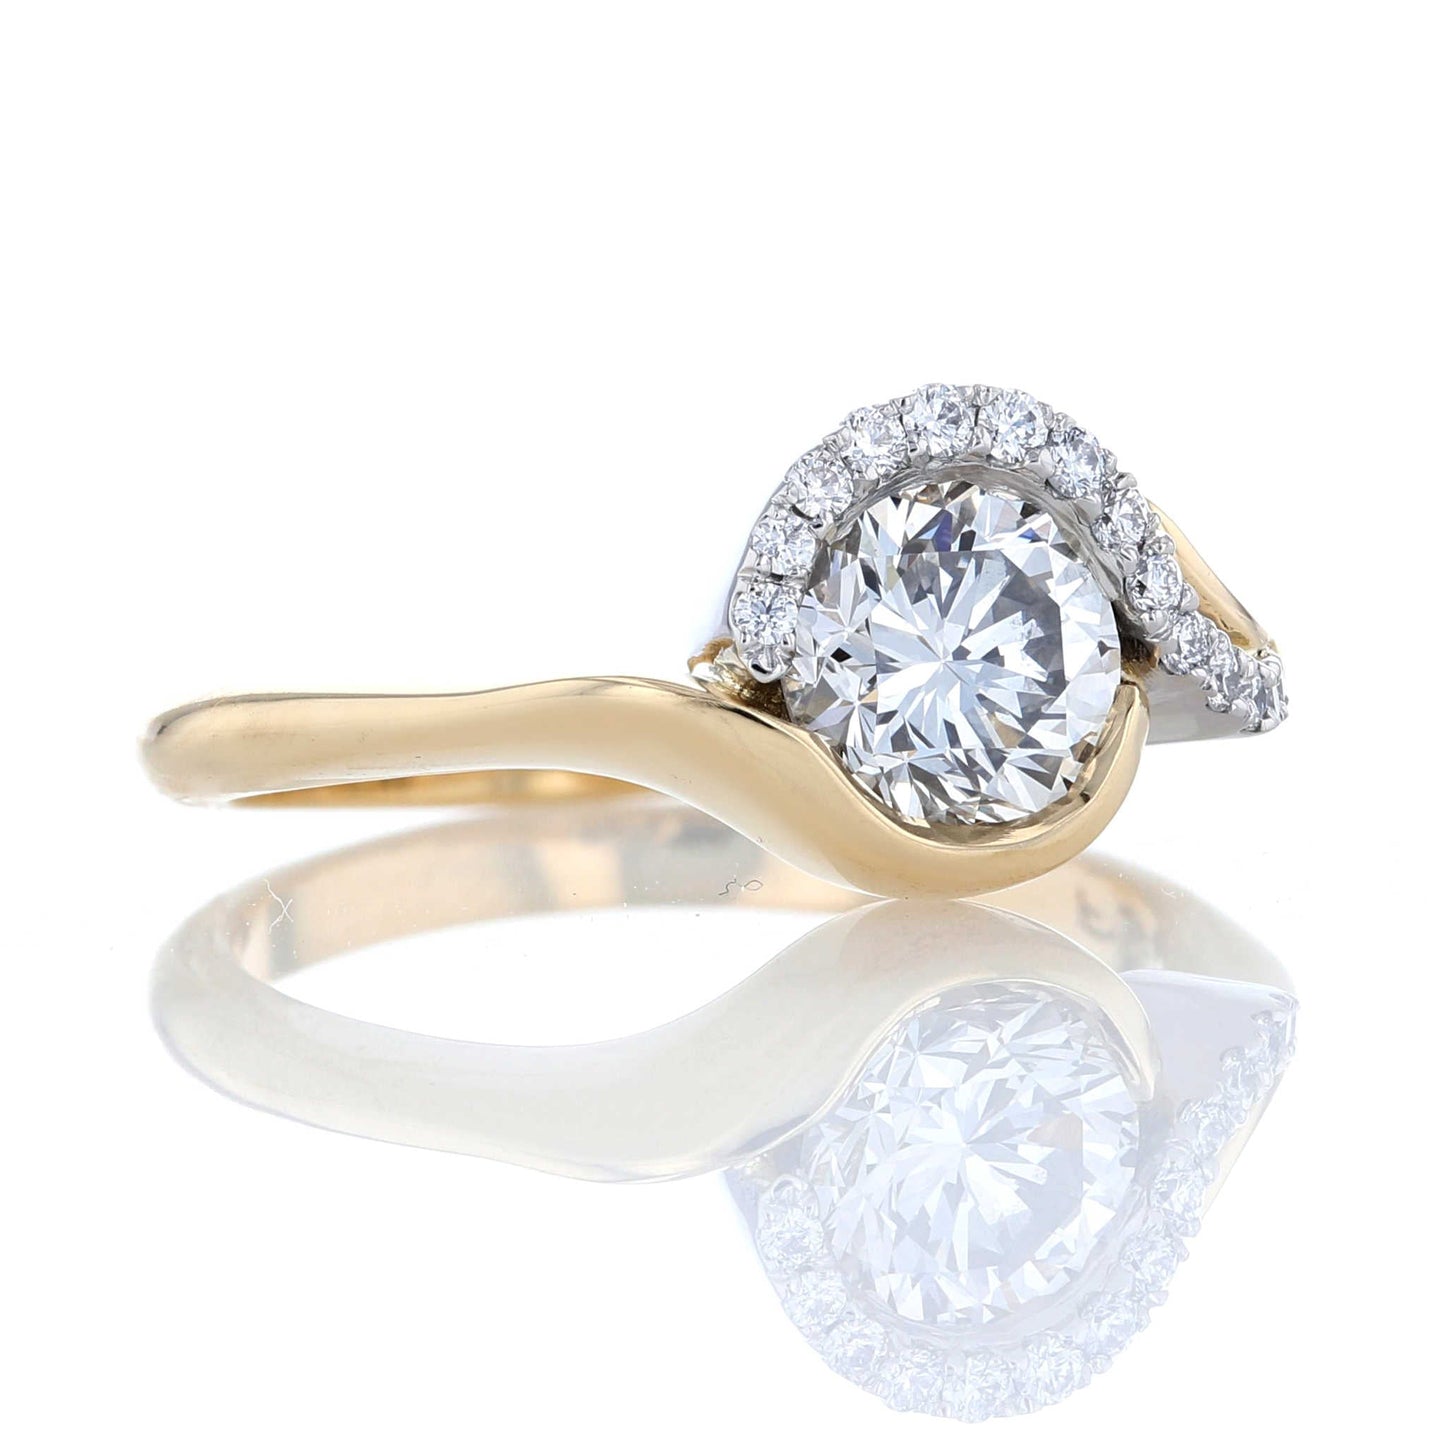 Swish Bypass Diamond Halo Engagement Ring Side View